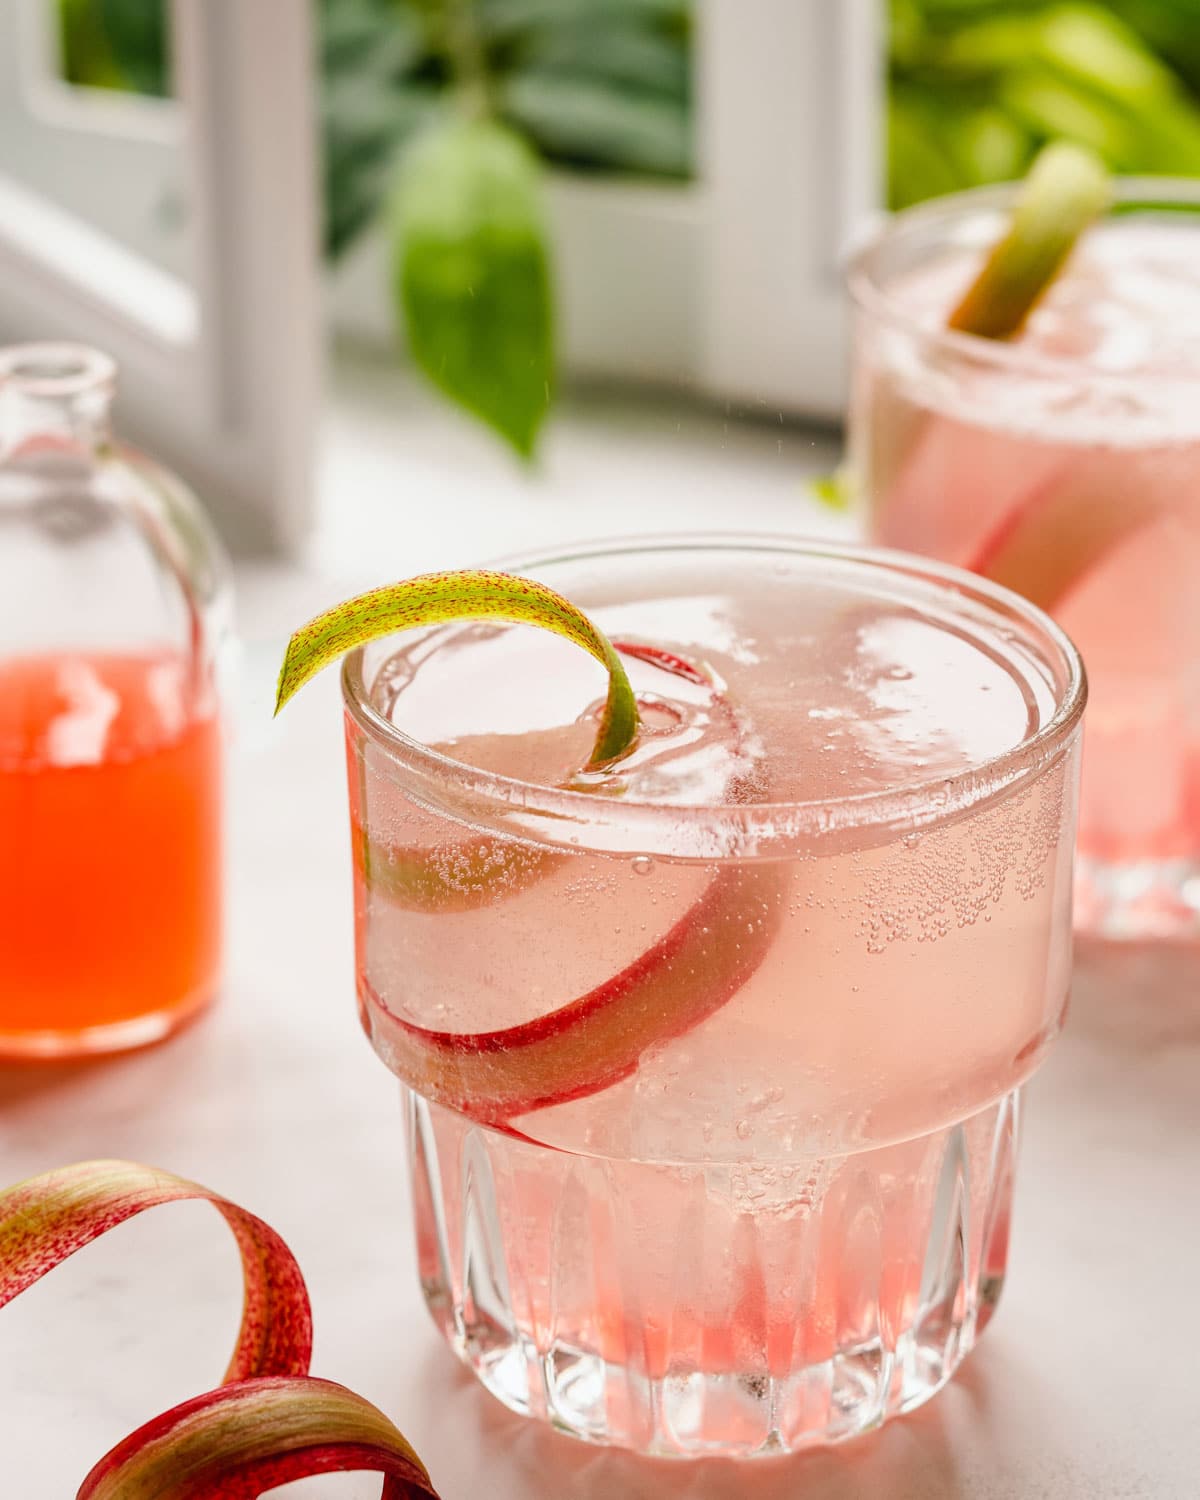 A fizzy summer drink made of rhubarb and topped off with ice.